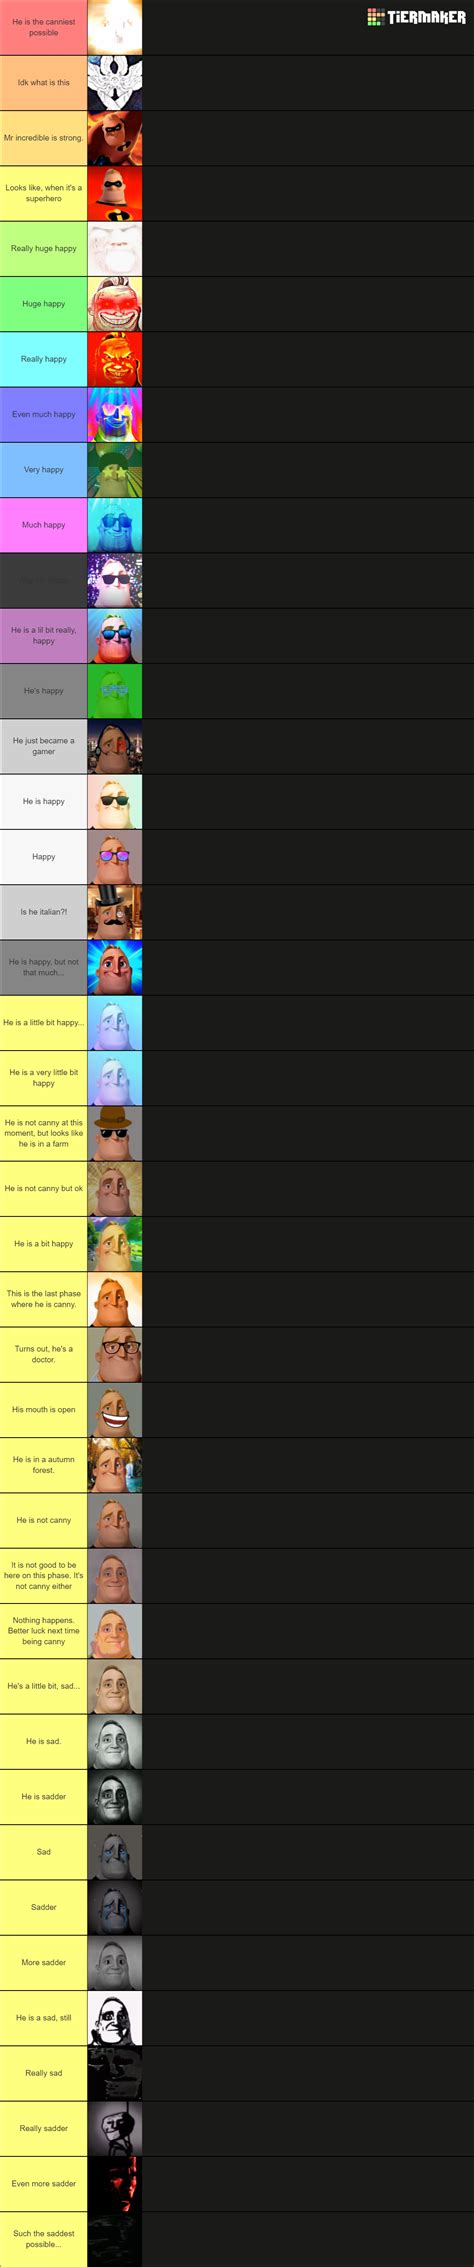 Mr Incredible Becoming Uncanny Mega Extended Tier List Community Rankings TierMaker